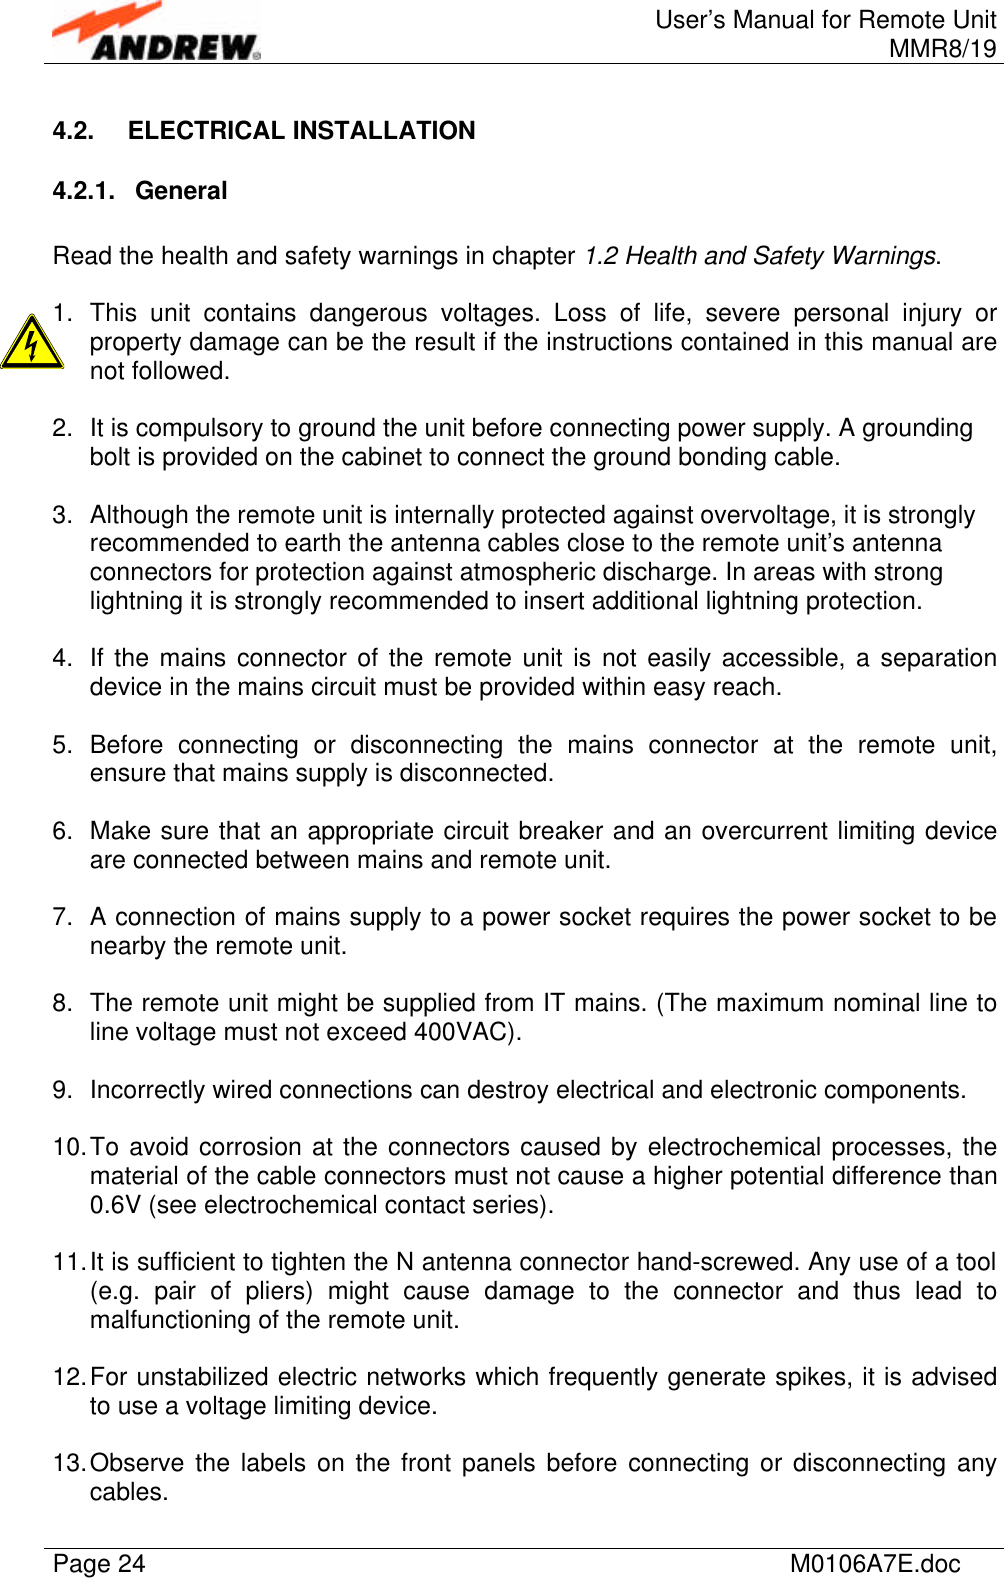 User’s Manual for Remote UnitMMR8/19Page 24 M0106A7E.doc4.2. ELECTRICAL INSTALLATION4.2.1. GeneralRead the health and safety warnings in chapter 1.2 Health and Safety Warnings.1. This unit contains dangerous voltages. Loss of life, severe personal injury orproperty damage can be the result if the instructions contained in this manual arenot followed.2. It is compulsory to ground the unit before connecting power supply. A groundingbolt is provided on the cabinet to connect the ground bonding cable.3. Although the remote unit is internally protected against overvoltage, it is stronglyrecommended to earth the antenna cables close to the remote unit’s antennaconnectors for protection against atmospheric discharge. In areas with stronglightning it is strongly recommended to insert additional lightning protection.4. If the mains connector of the remote unit is not easily accessible, a separationdevice in the mains circuit must be provided within easy reach.5. Before connecting or disconnecting the mains connector at the remote unit,ensure that mains supply is disconnected.6. Make sure that an appropriate circuit breaker and an overcurrent limiting deviceare connected between mains and remote unit.7. A connection of mains supply to a power socket requires the power socket to benearby the remote unit.8. The remote unit might be supplied from IT mains. (The maximum nominal line toline voltage must not exceed 400VAC).9. Incorrectly wired connections can destroy electrical and electronic components.10. To avoid corrosion at the connectors caused by electrochemical processes, thematerial of the cable connectors must not cause a higher potential difference than0.6V (see electrochemical contact series).11. It is sufficient to tighten the N antenna connector hand-screwed. Any use of a tool(e.g. pair of pliers) might cause damage to the connector and thus lead tomalfunctioning of the remote unit.12. For unstabilized electric networks which frequently generate spikes, it is advisedto use a voltage limiting device.13. Observe the labels on the front panels before connecting or disconnecting anycables.